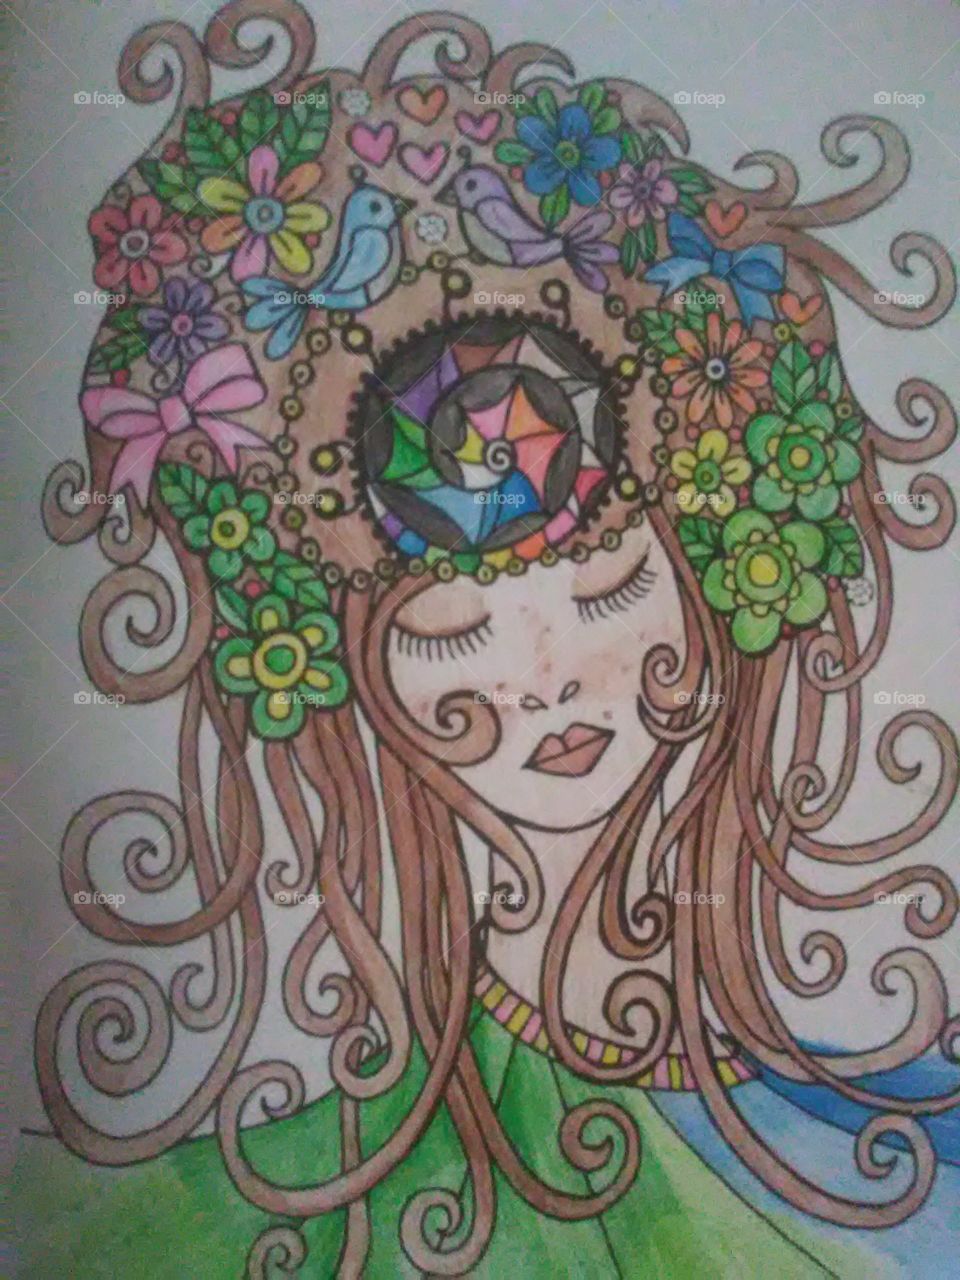 release nothing but calm soothing energy from this colorful goddess of nature . breathe in the beauty.